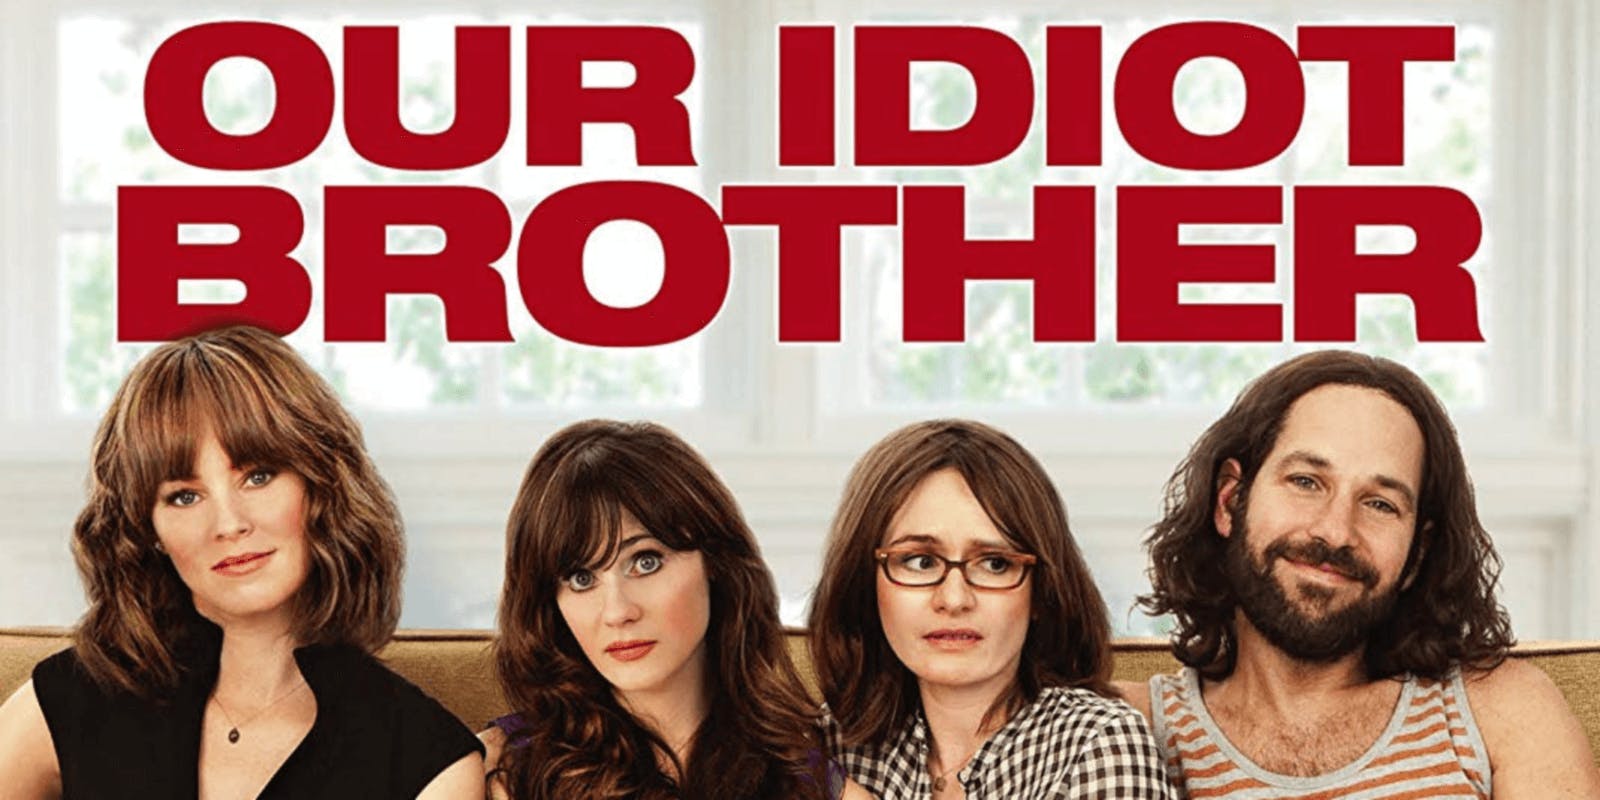 paul rudd movies netflix our idiot brother